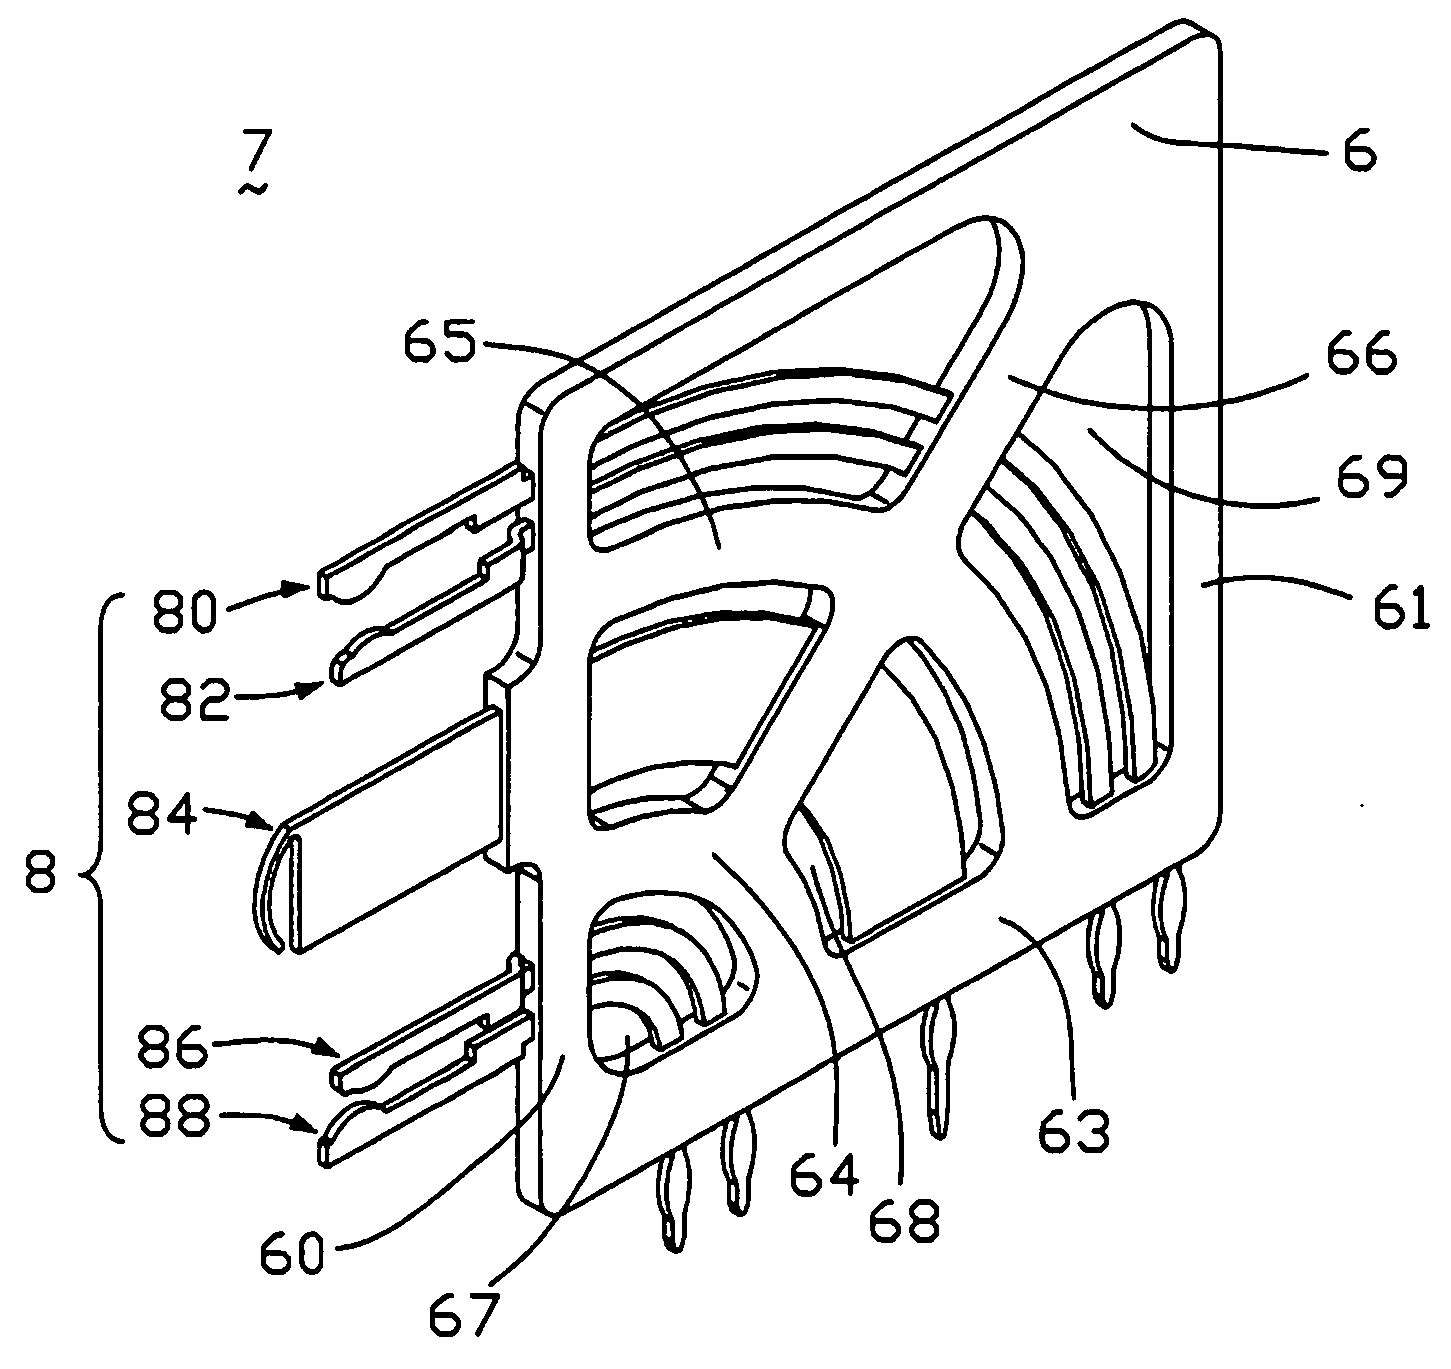 Electrical connector with double mating interfaces for electronic components